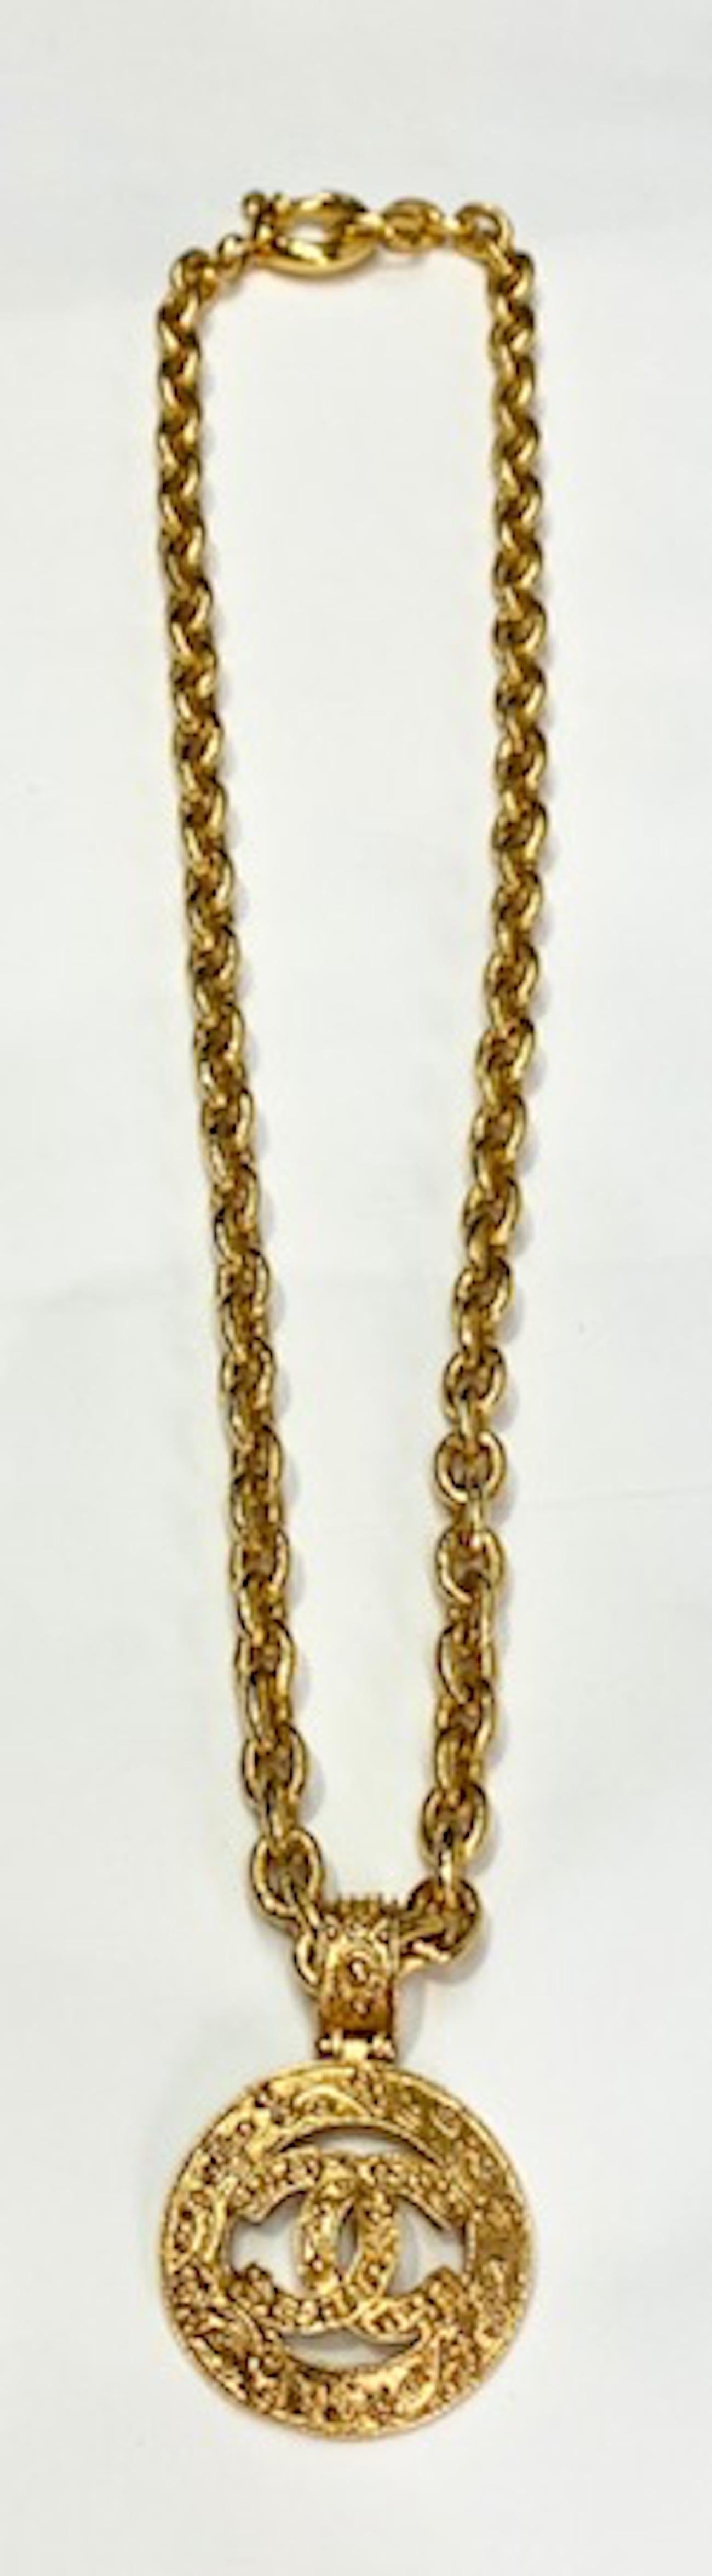 A very nice and Chanel pendant necklace from the Autumn 1994 collection. The chain is a heavy 3/8 of an inch wide anchor link and measures 26.5 inches long including the clasps. One end has a large 7/8 of an inch jump ring with interlocking CC logo